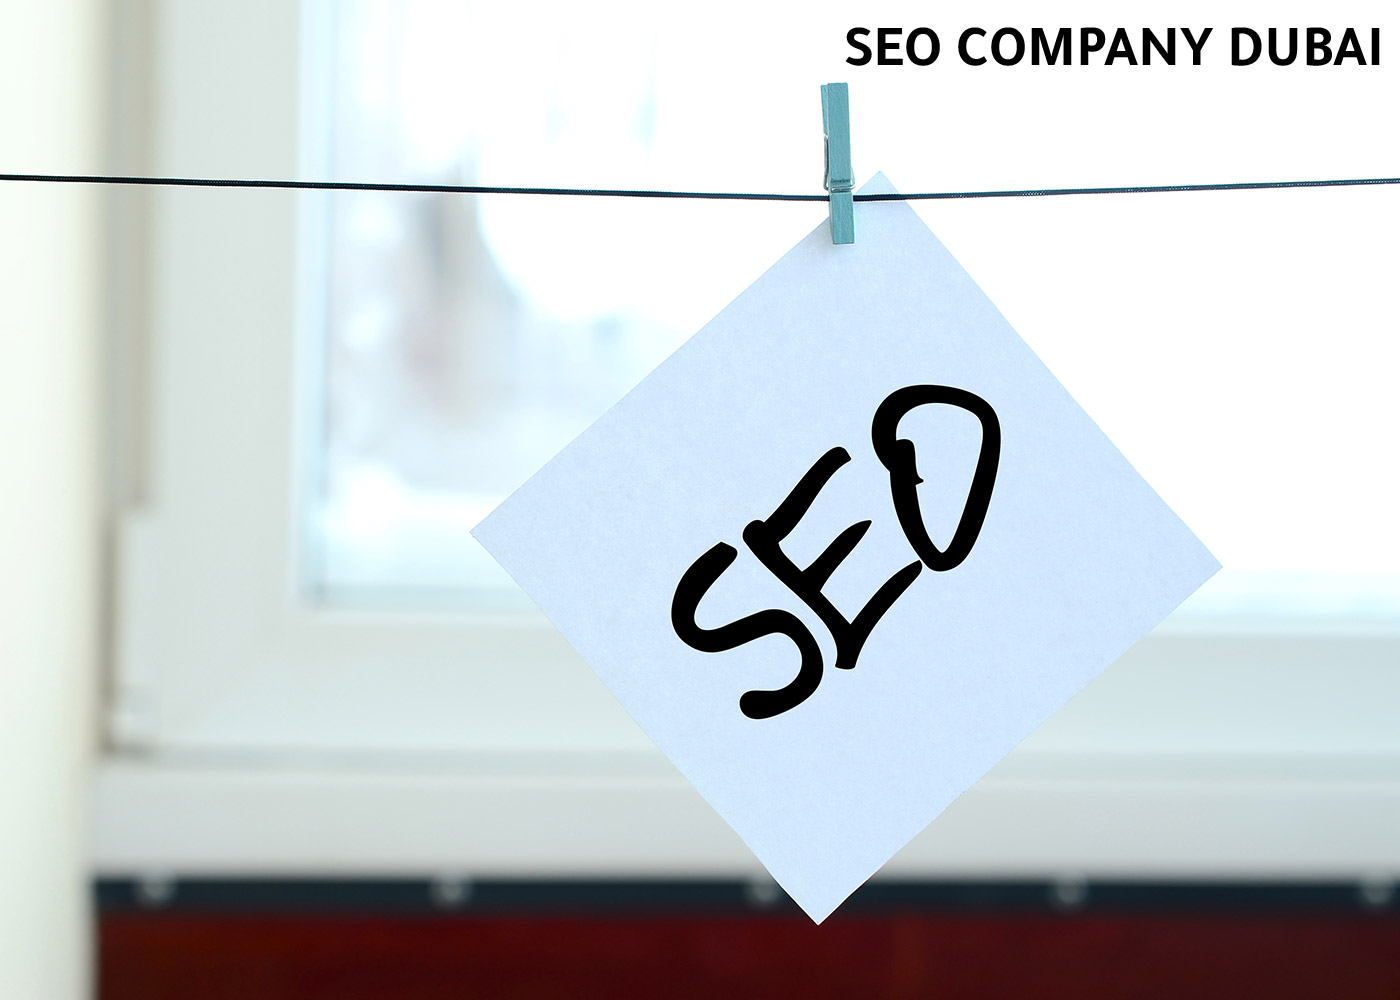 How to do Proper SEO - The Beginners Guide 2021